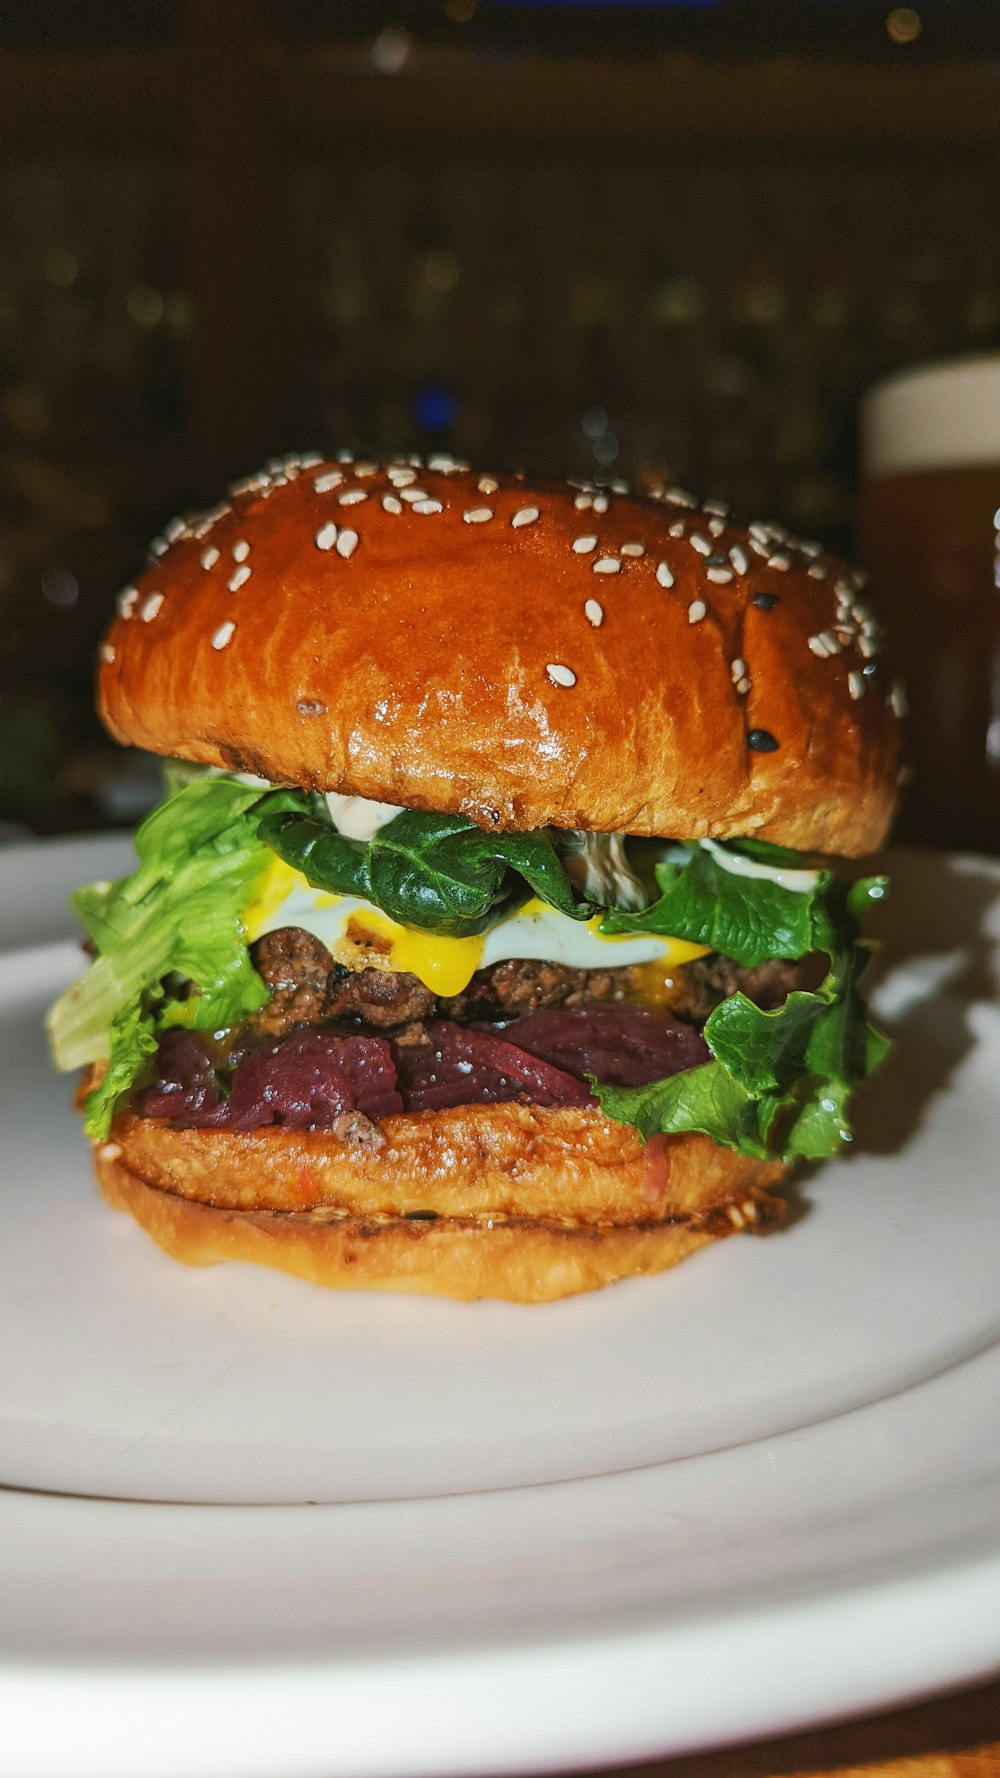 a hamburger with lettuce, cheese, and other toppings